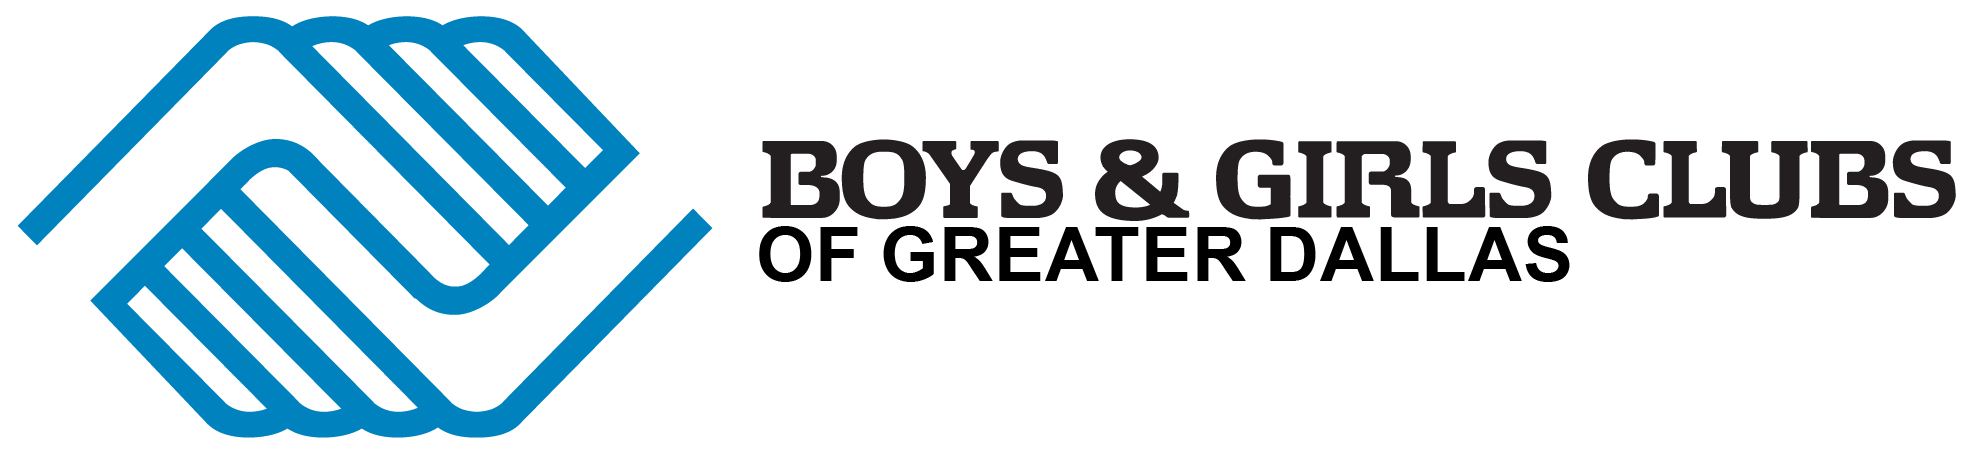 Boys & Girls Clubs of Greater Dallas